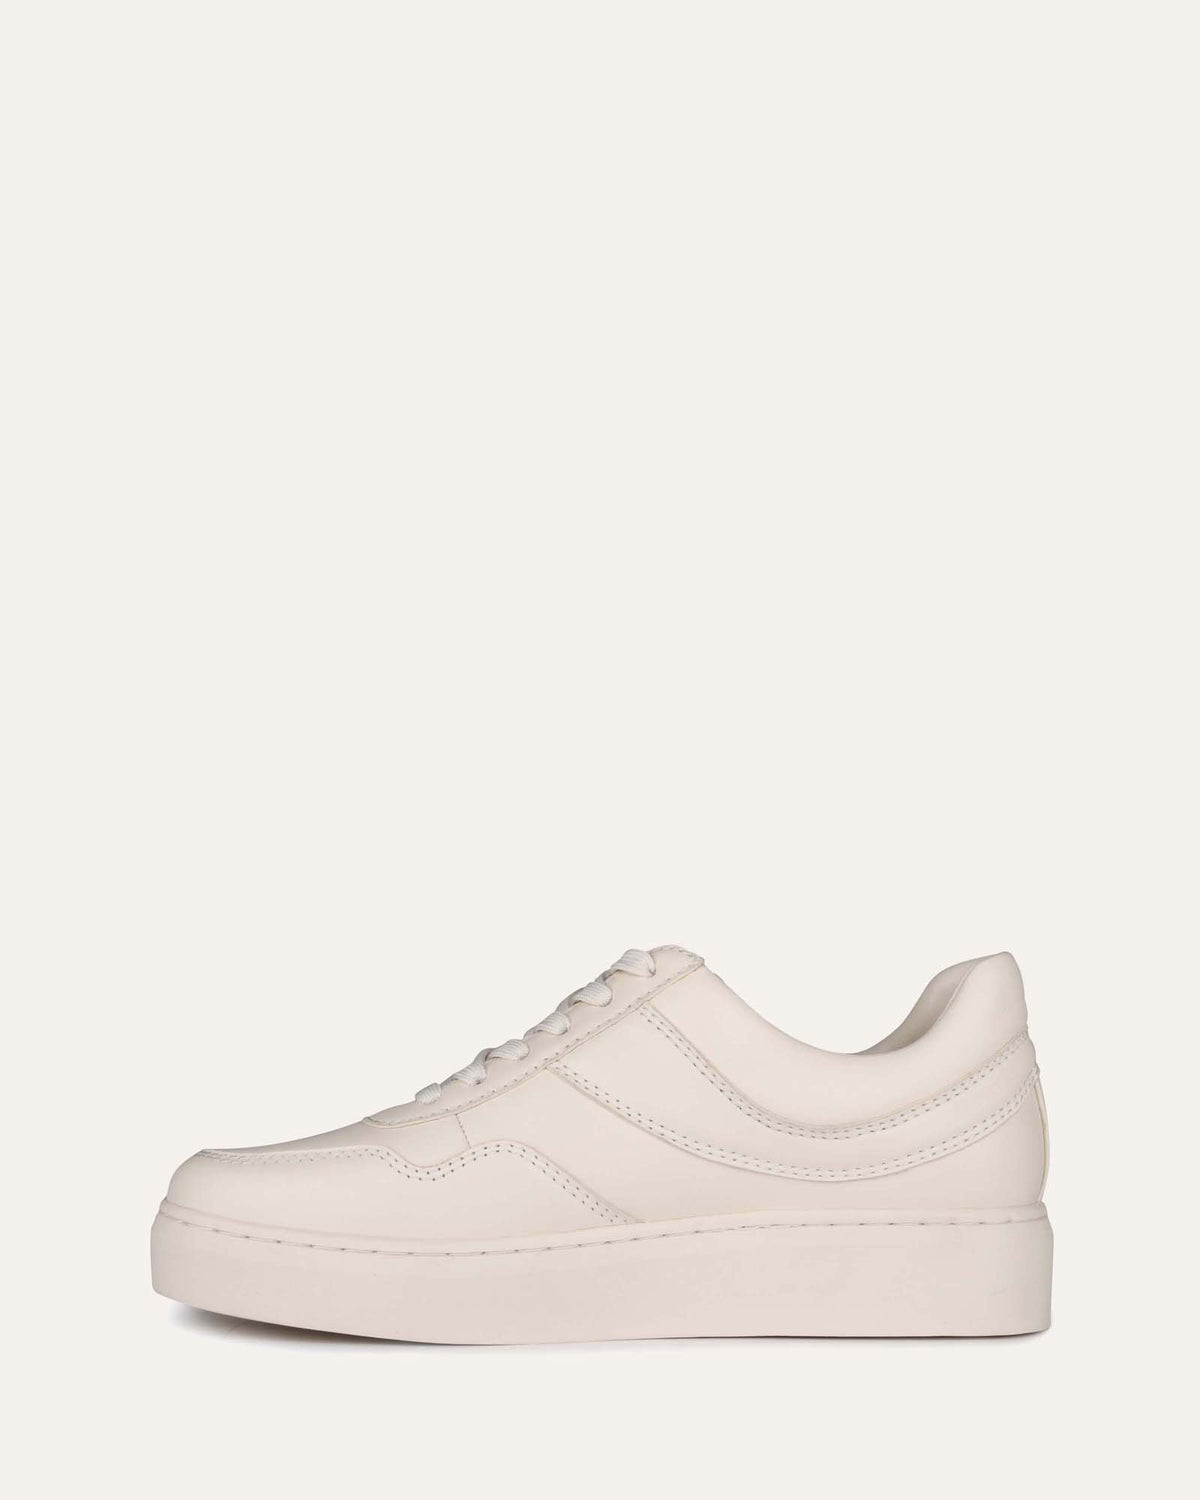 HALLE SNEAKERS OFF WHITE LEATHER